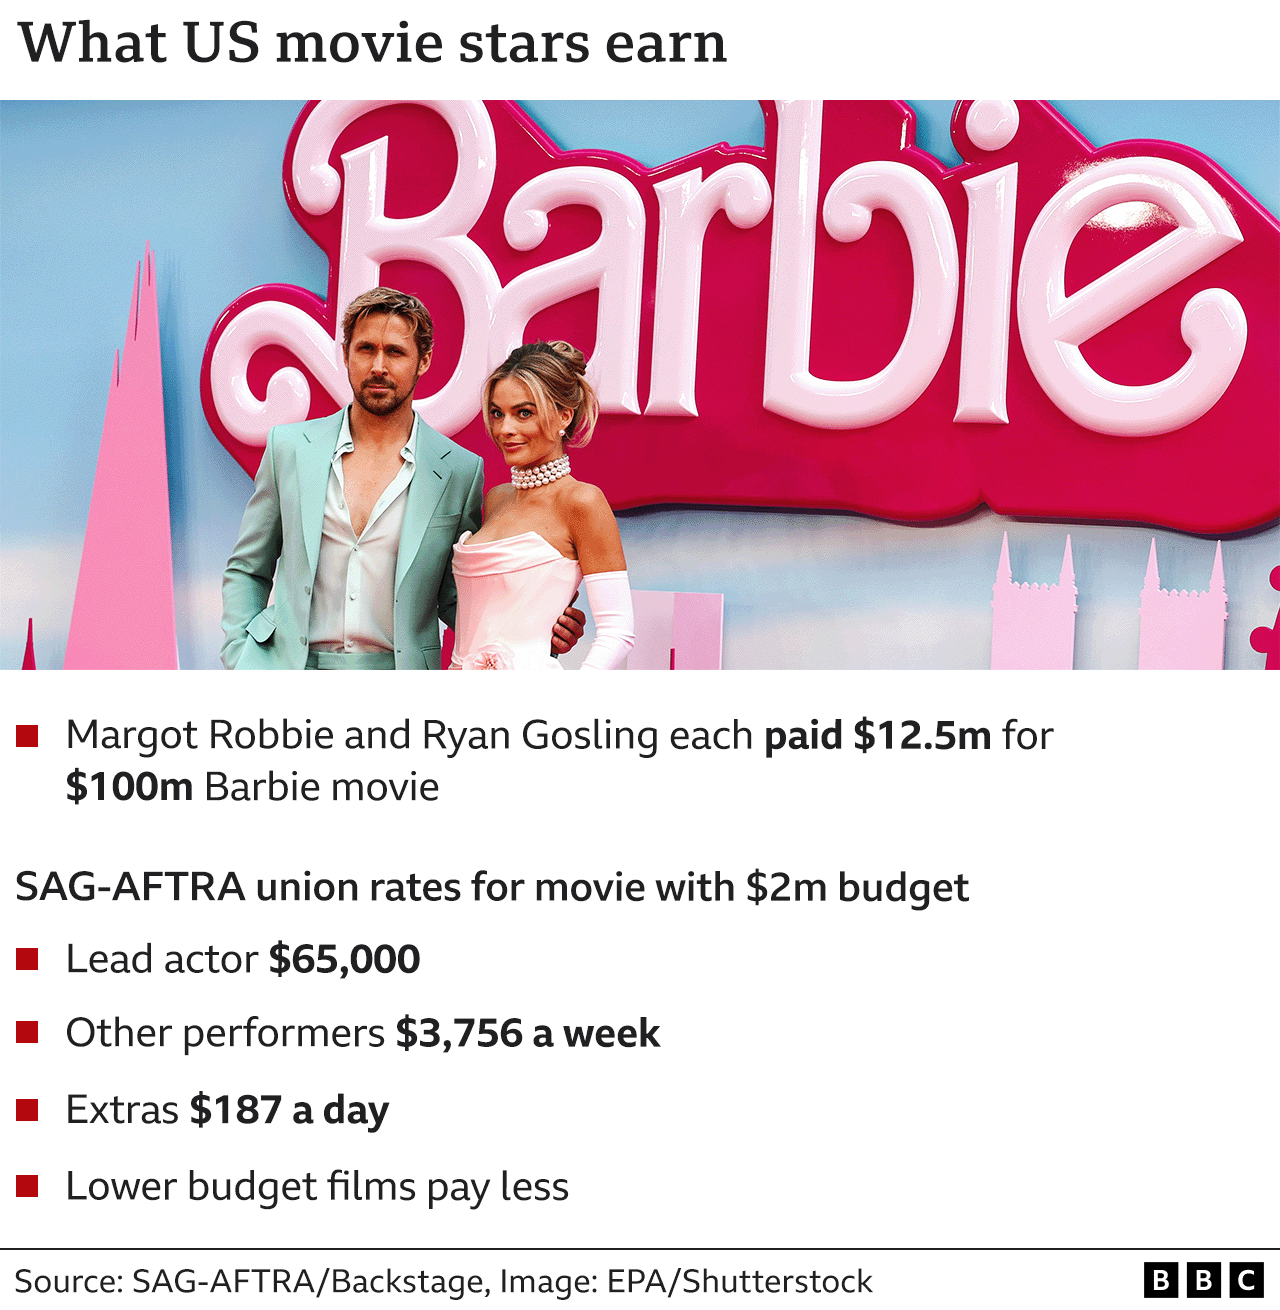 Graphic showing actor pay scales